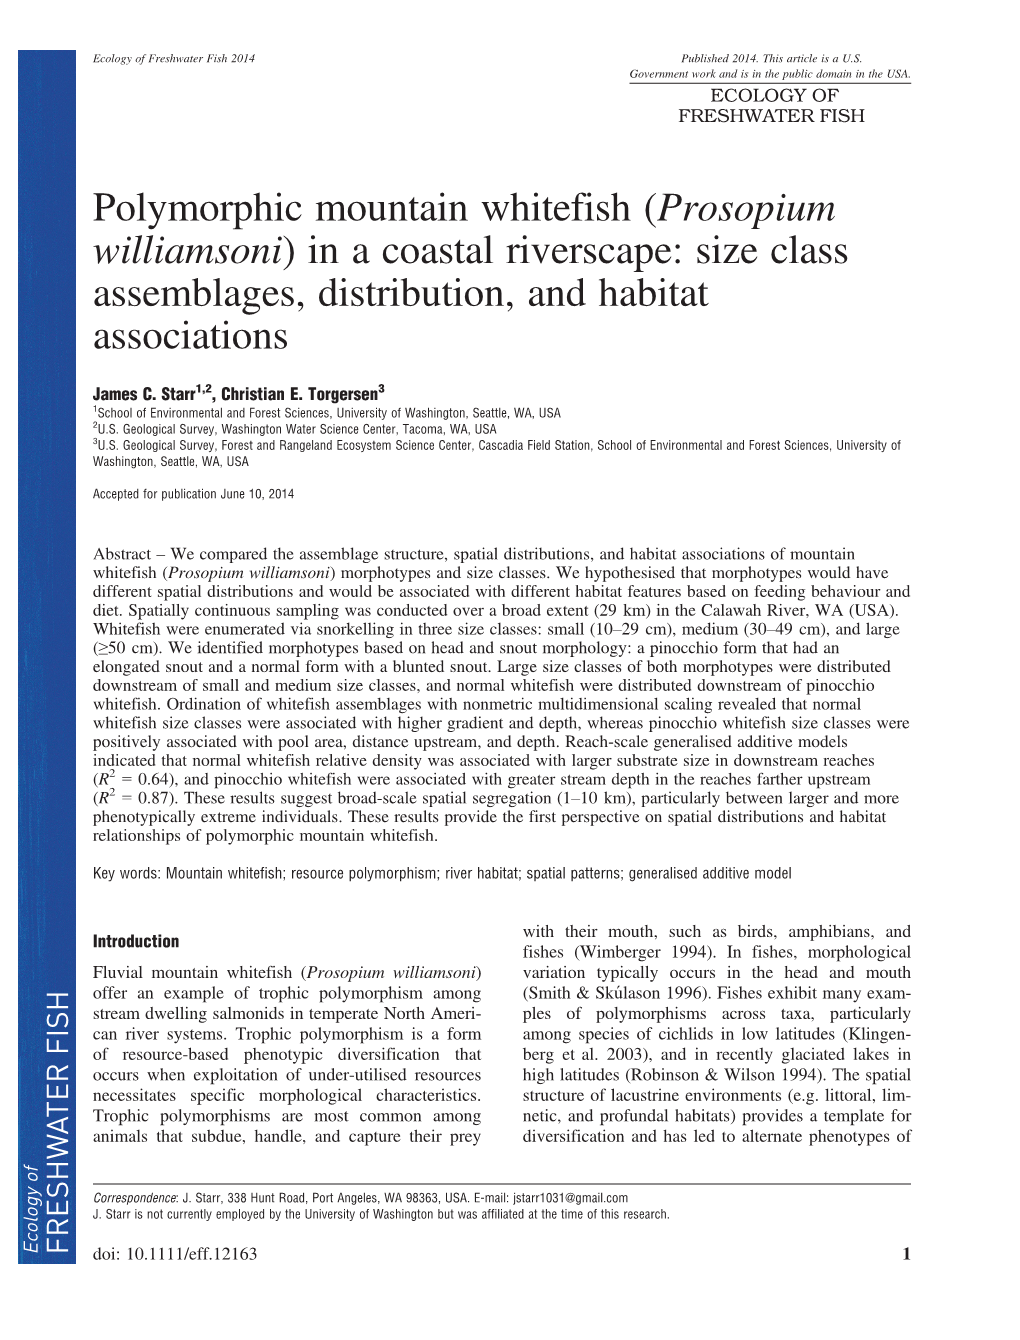 Polymorphic Mountain Whitefish (Prosopium Williamsoni) in a Coastal Riverscape: Size Class Assemblages, Distribution, and Habitat Associations